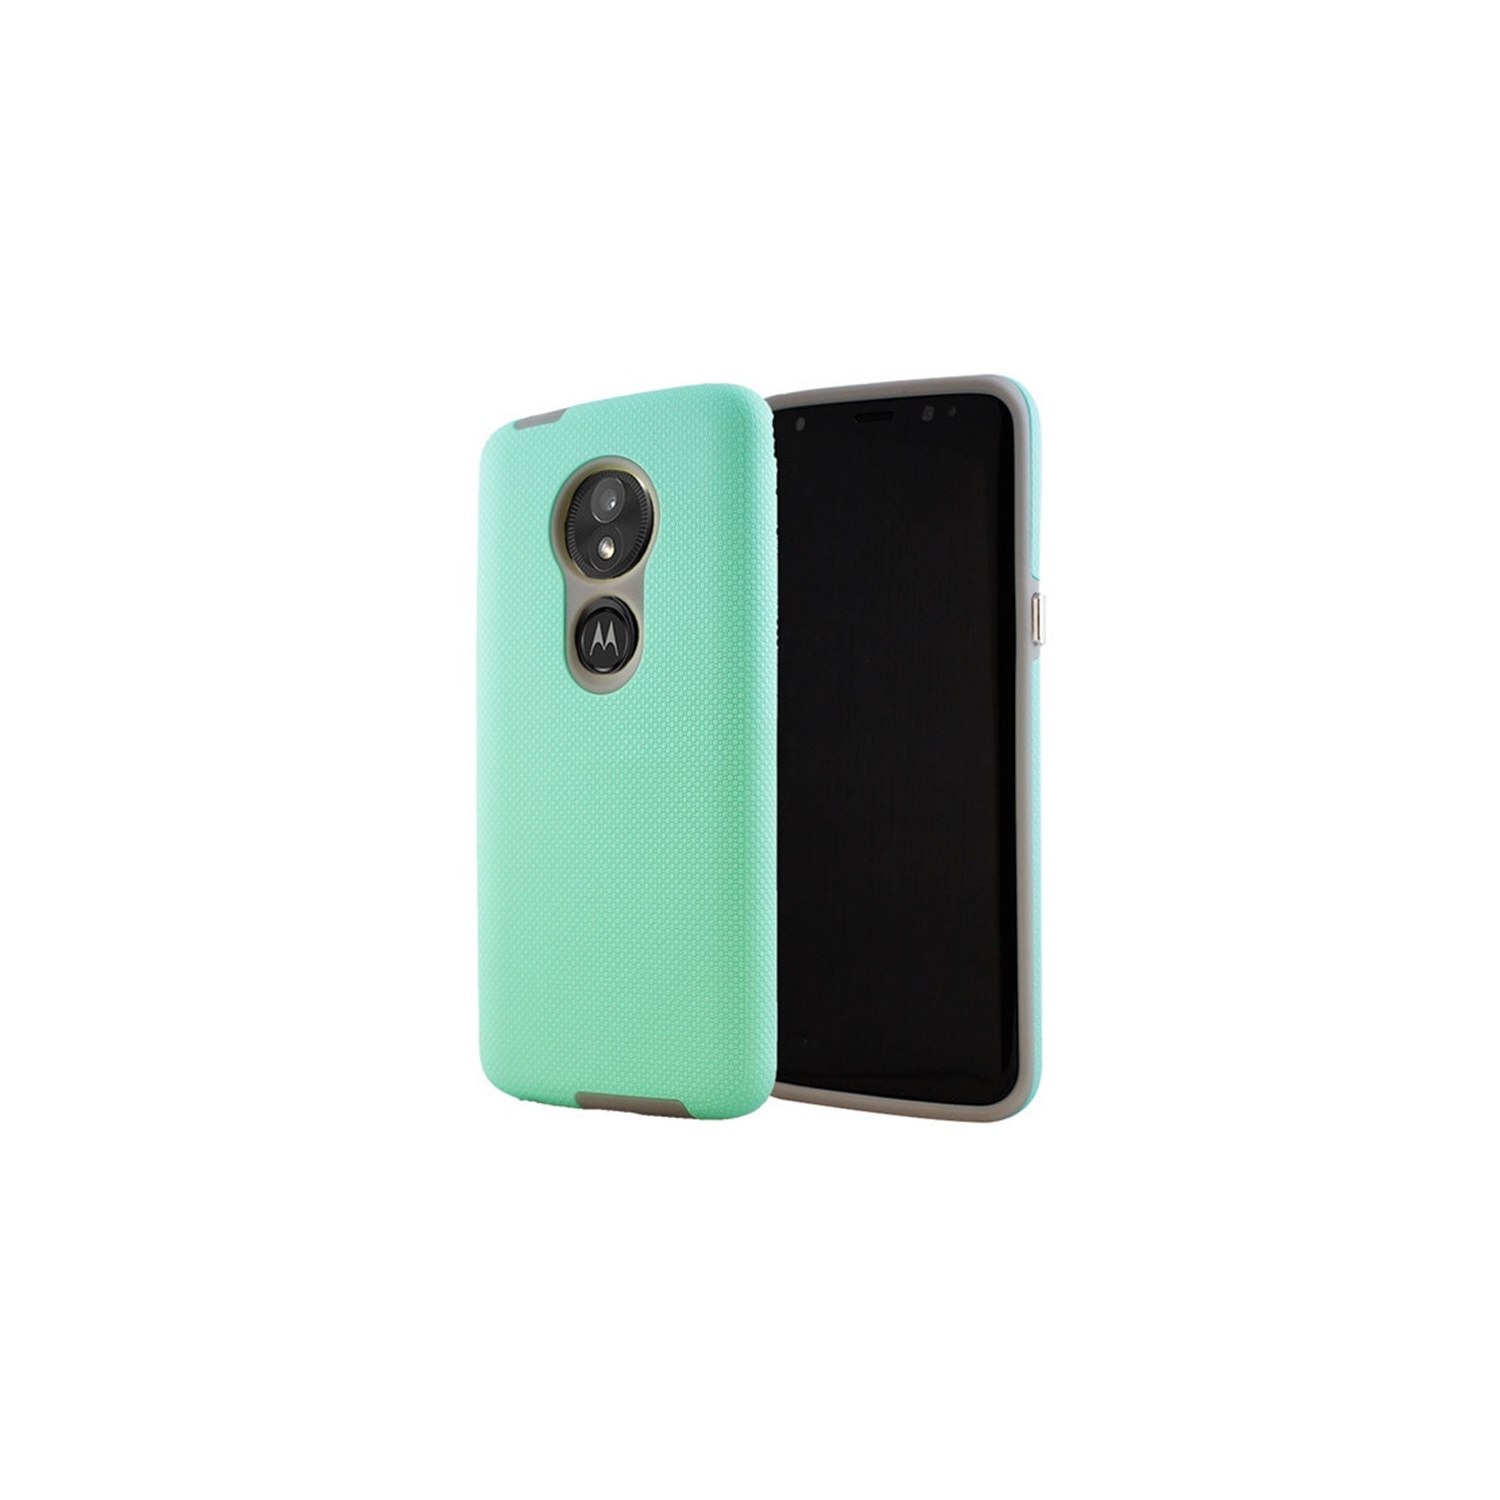 【CSmart】 Slim Fitted Hybrid Hard PC Shell Shockproof Scratch Resistant Case Cover for Motorola Moto G5, Mint